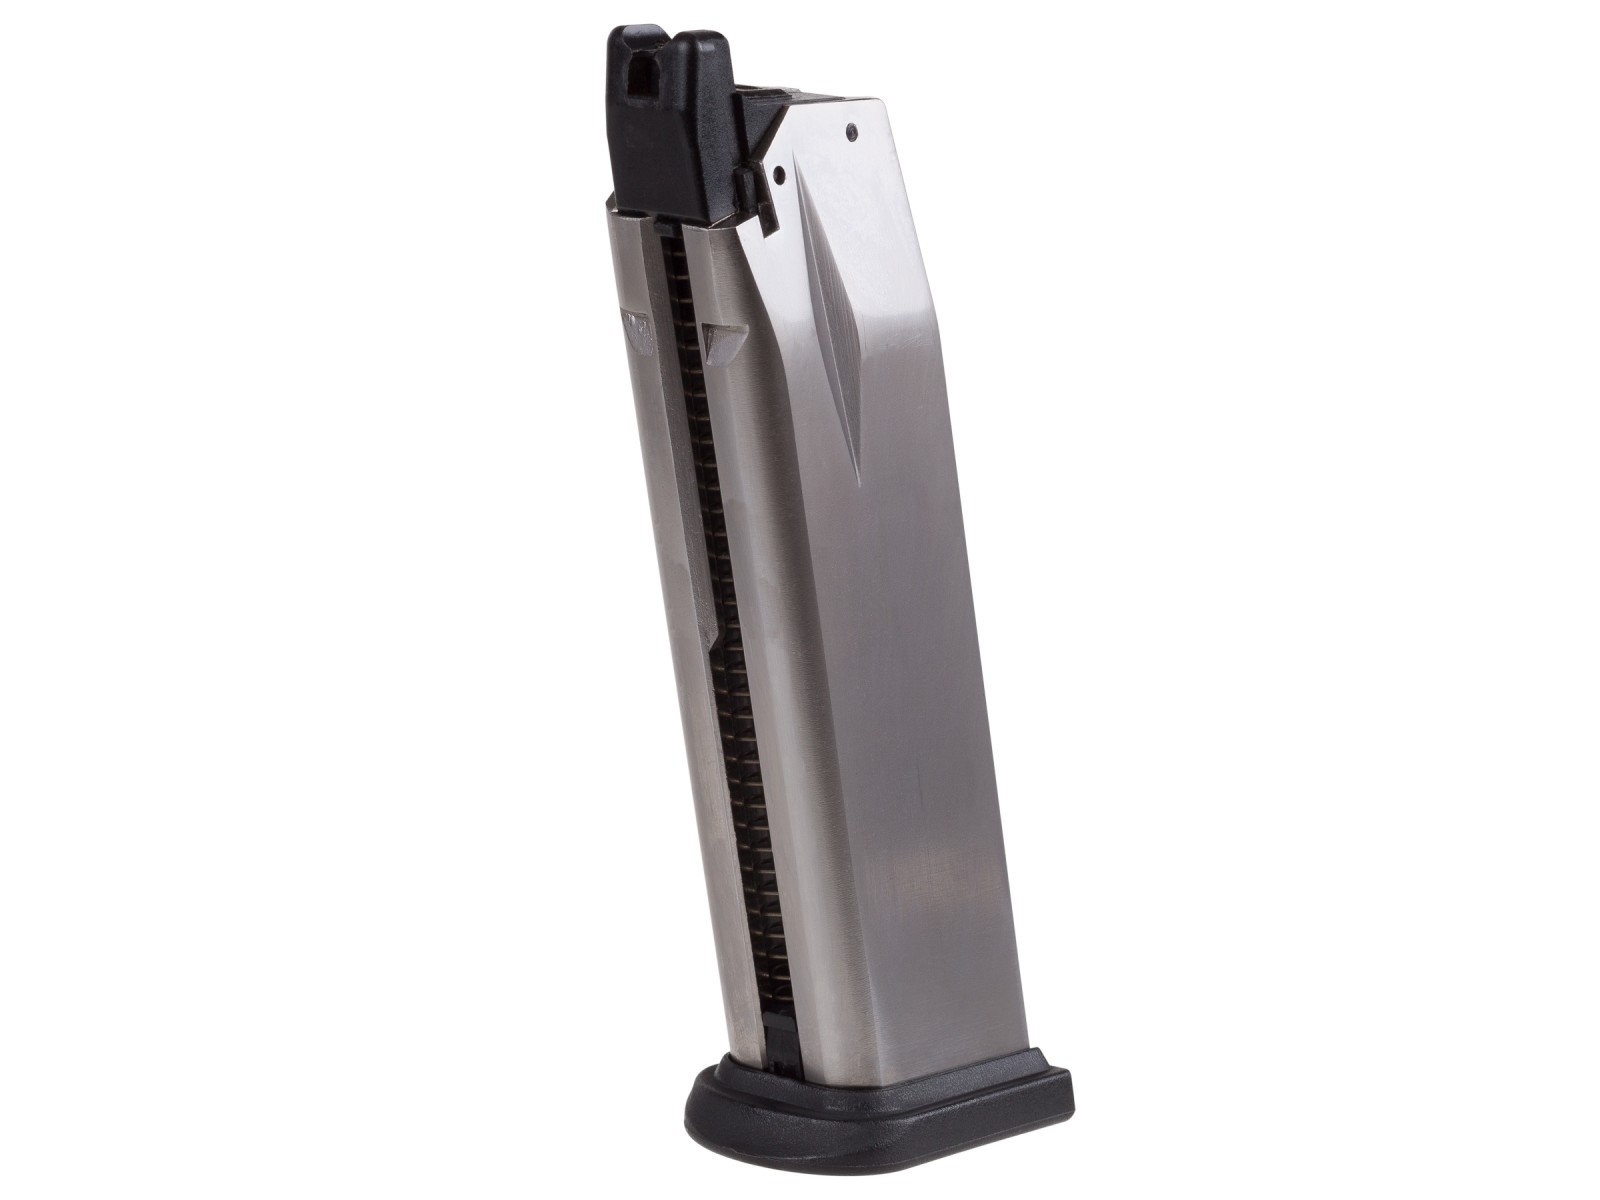 Springfield Armory XDM CO2 Airsoft Pistol Magazine, 25 rounds, fits 4.5" & 3.8" models